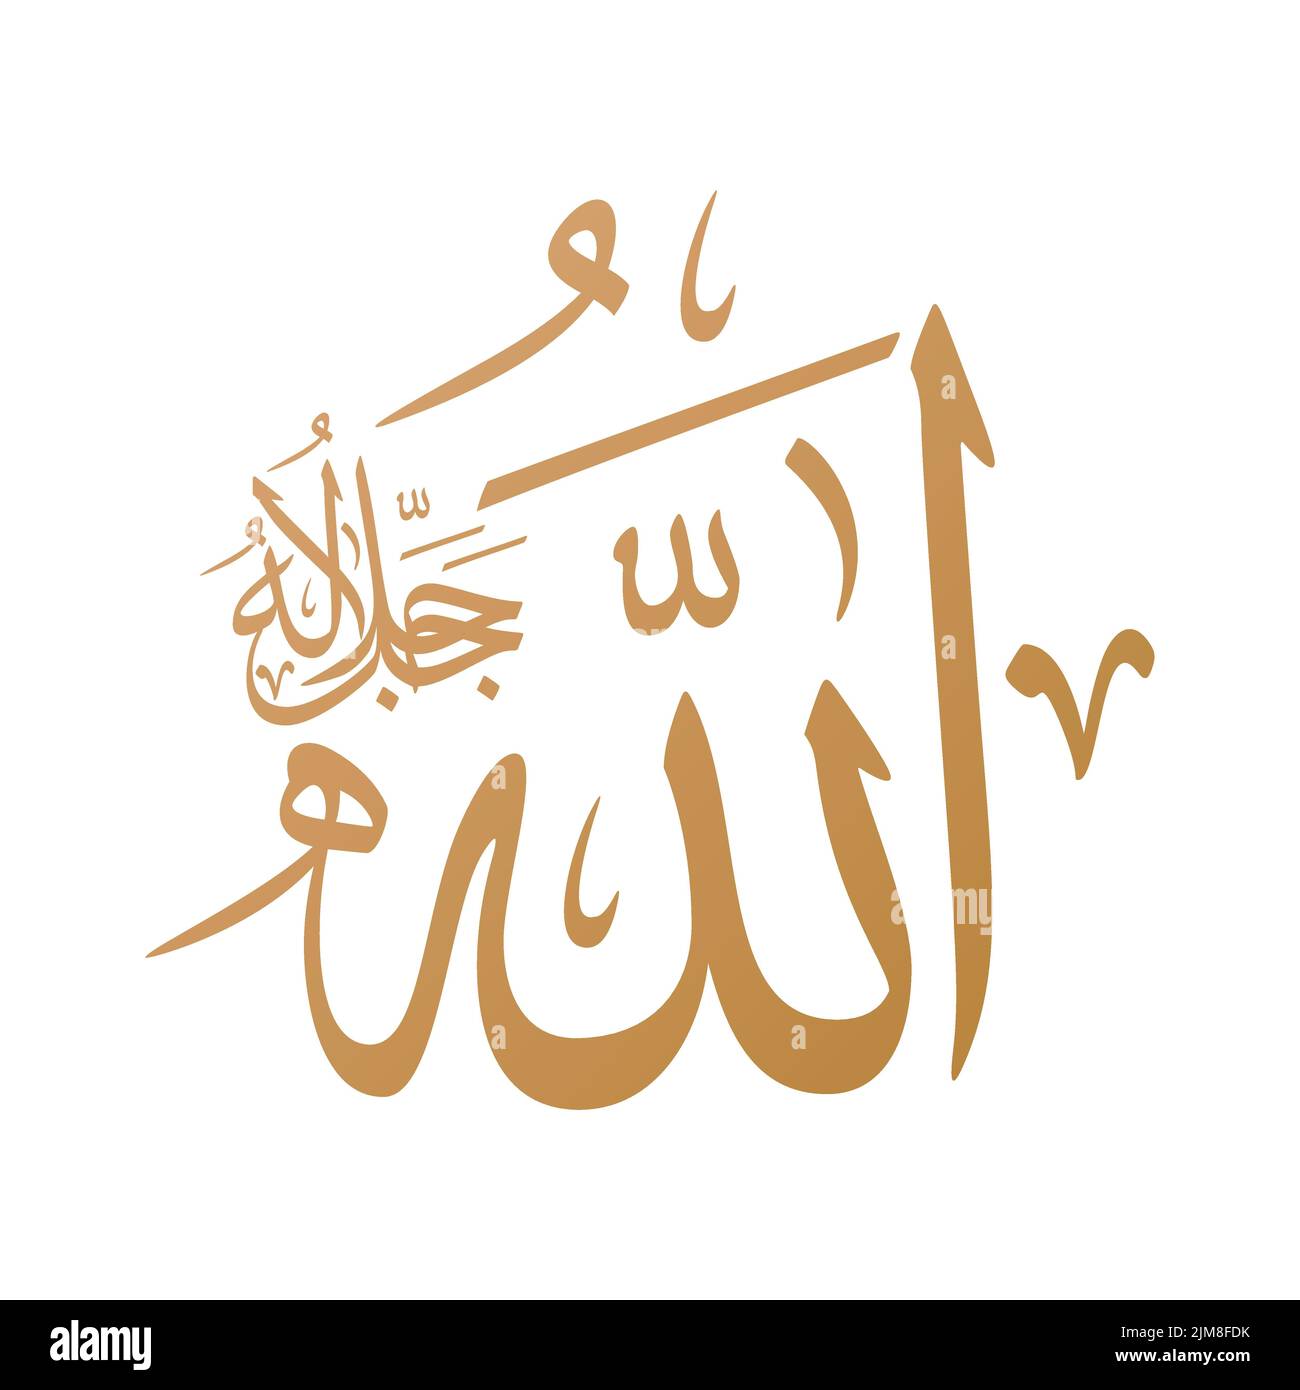 Allah calligraphy Cut Out Stock Images & Pictures - Alamy